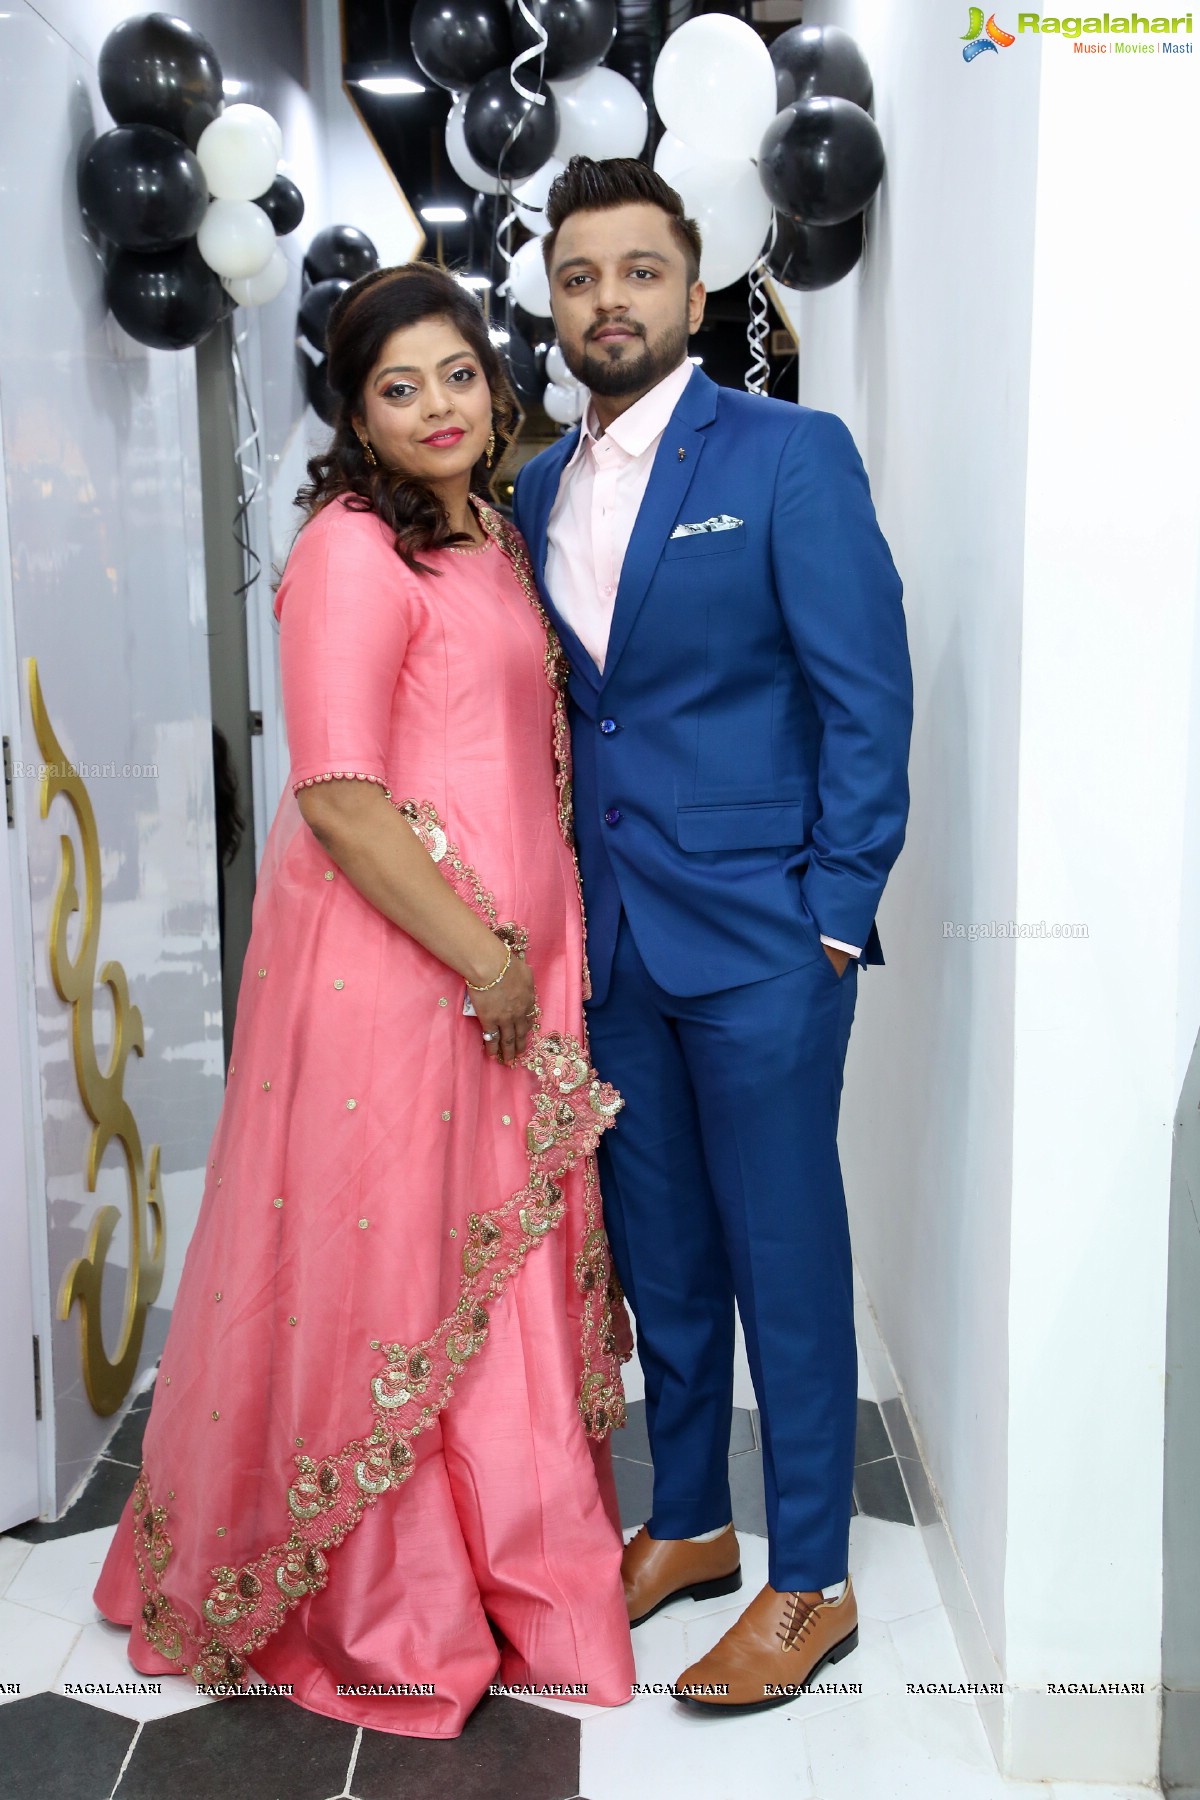 South India’s first Louis Unisex Salon & Spa opened at Jubilee Hills, Hyderabad 